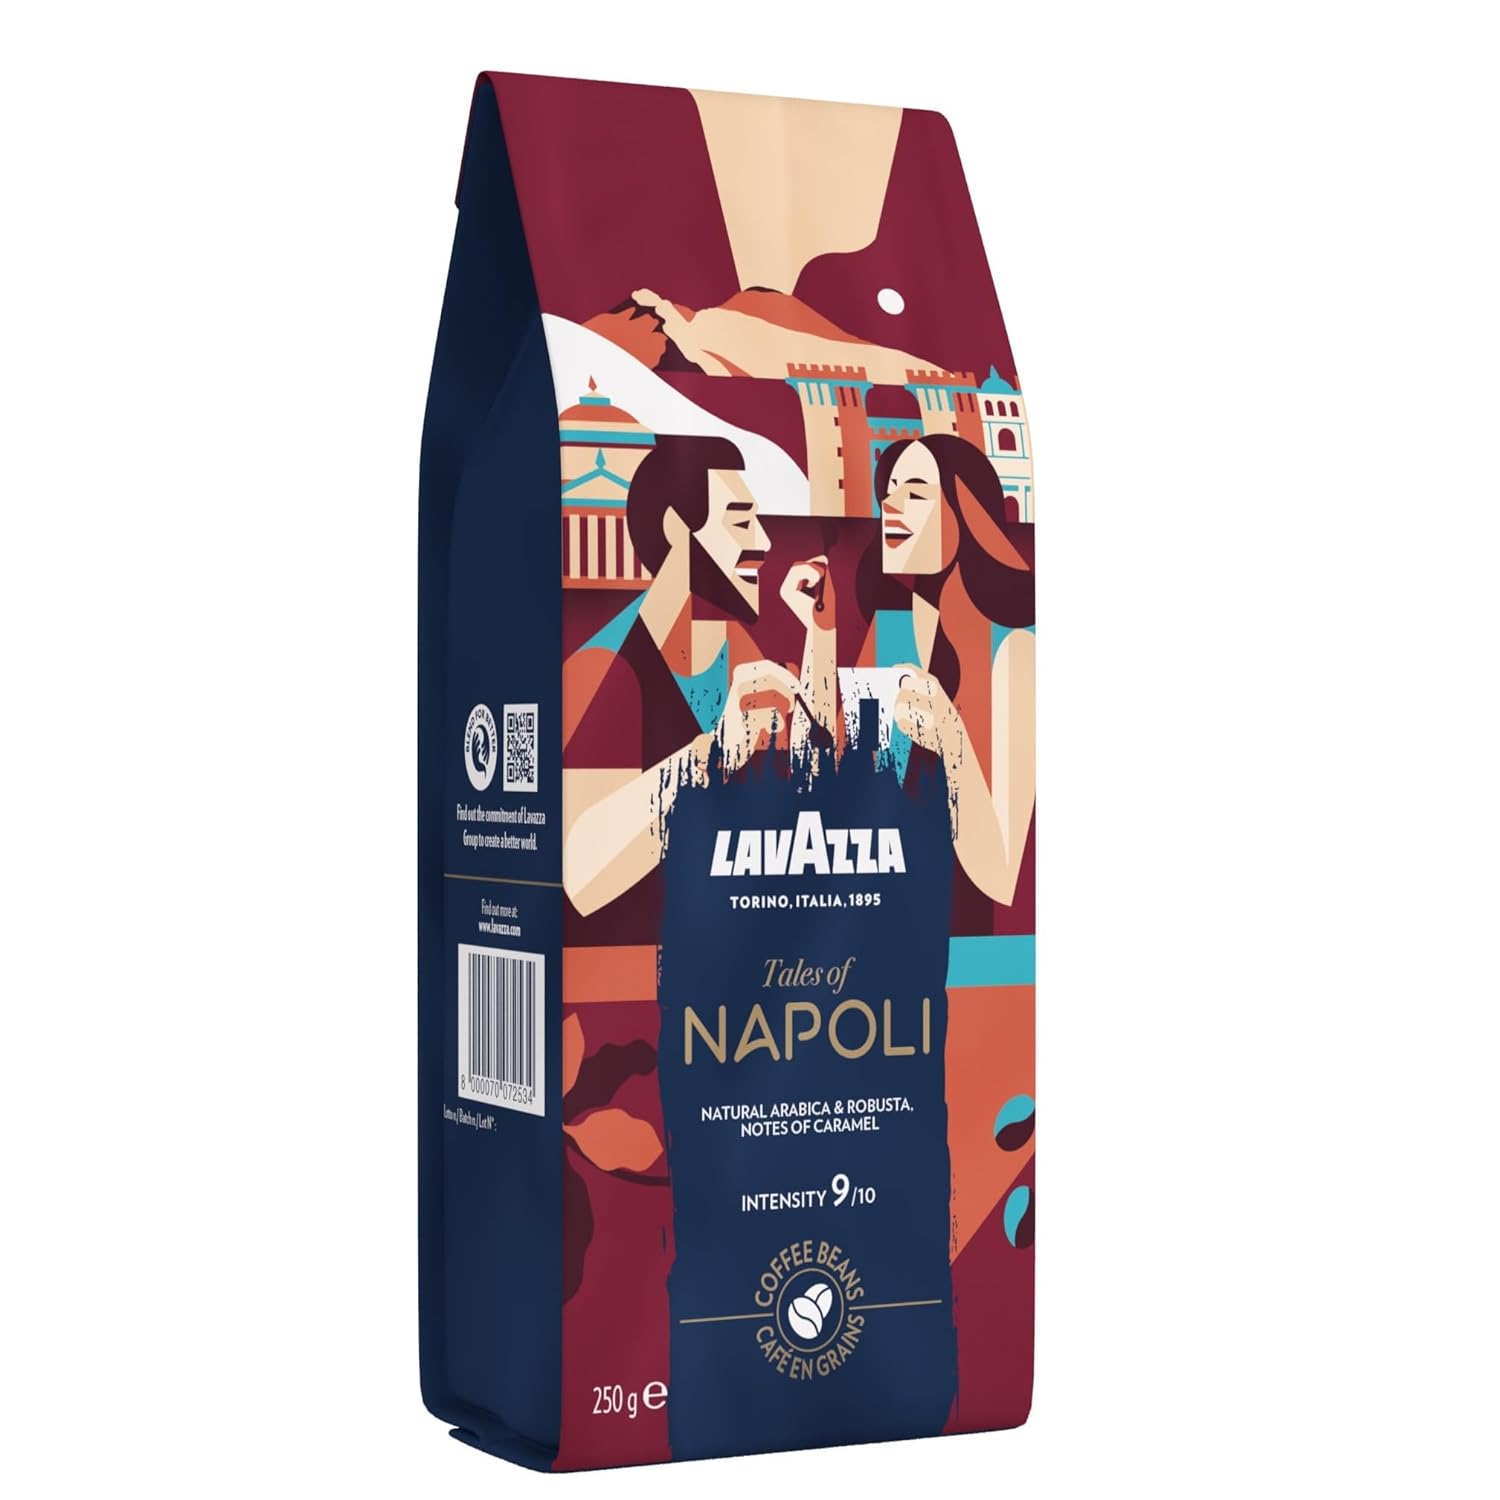 Lavazza, Tales of Napoli, Coffee Beans, Ideal for Espresso Coffee Machines, with Aroma Notes of Cocoa and Caramel, Arabica and Robusta, Intensity 9/10, Dark Roasting, 250 g